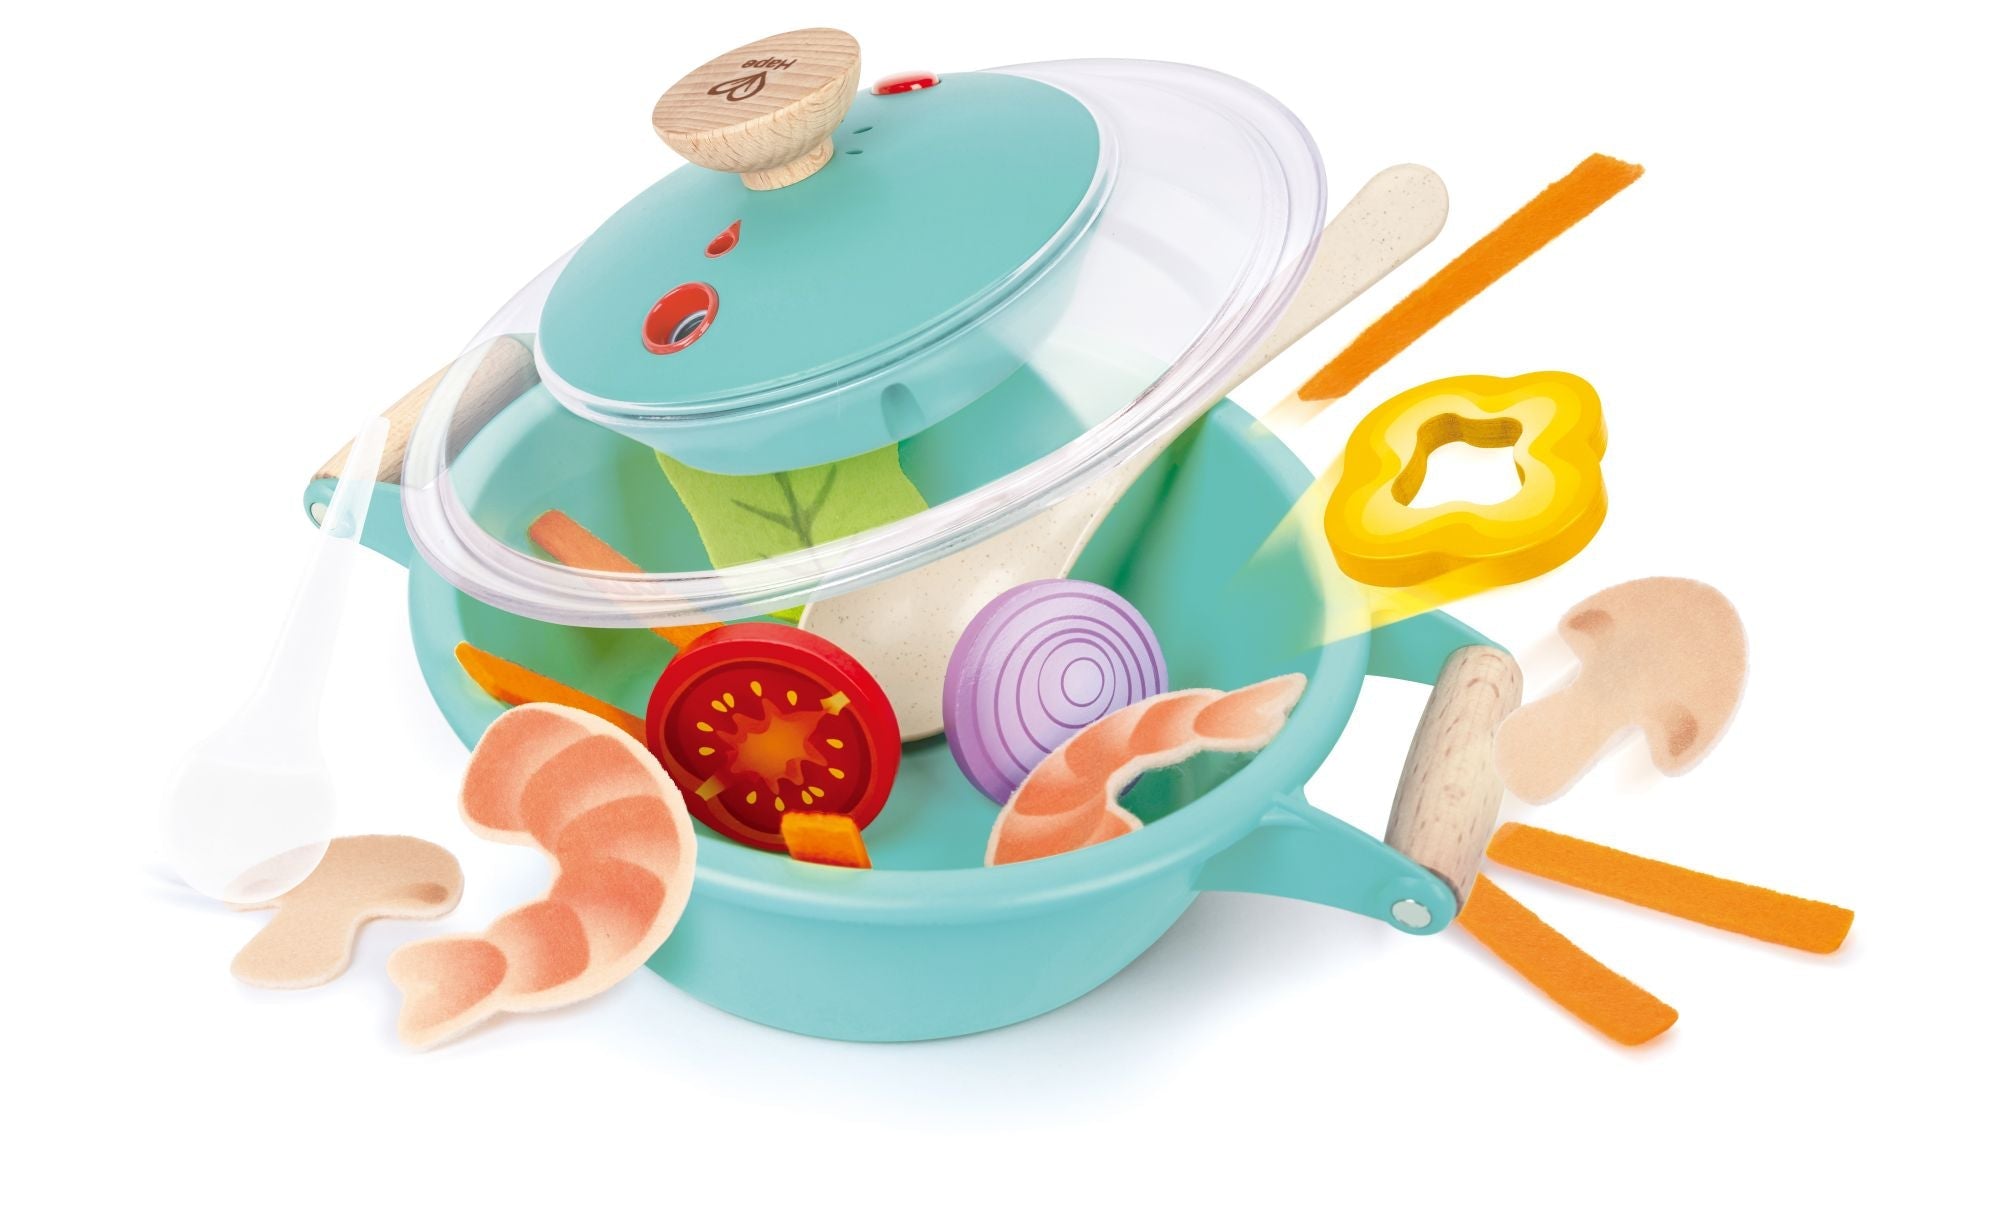 Hape Lunch Box Kid's Wooden Kitchen Play Food Set and Accessories